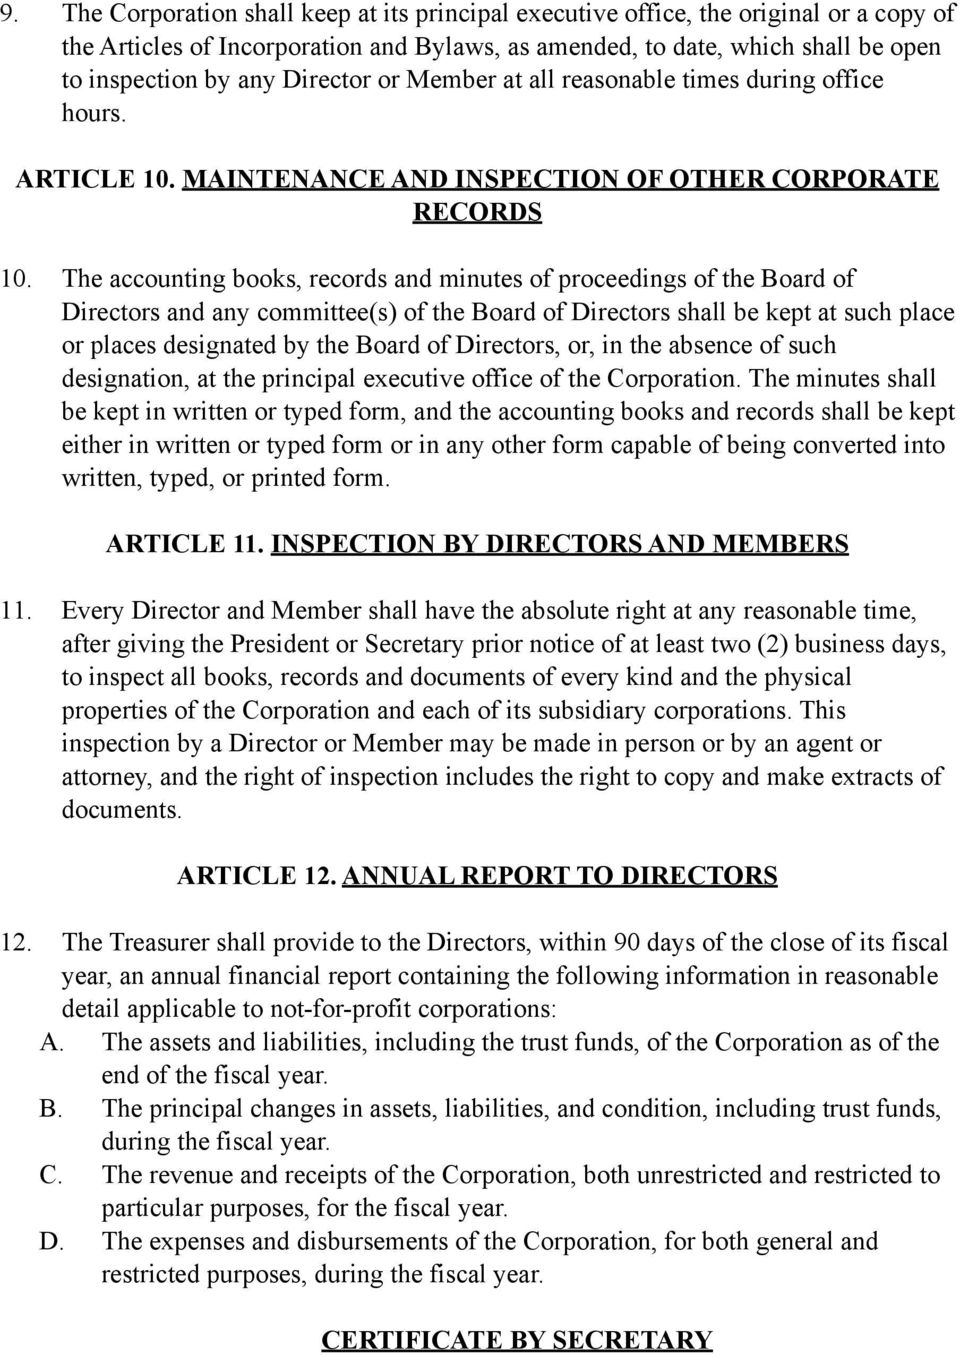 The accounting books, records and minutes of proceedings of the Board of Directors and any committee(s) of the Board of Directors shall be kept at such place or places designated by the Board of